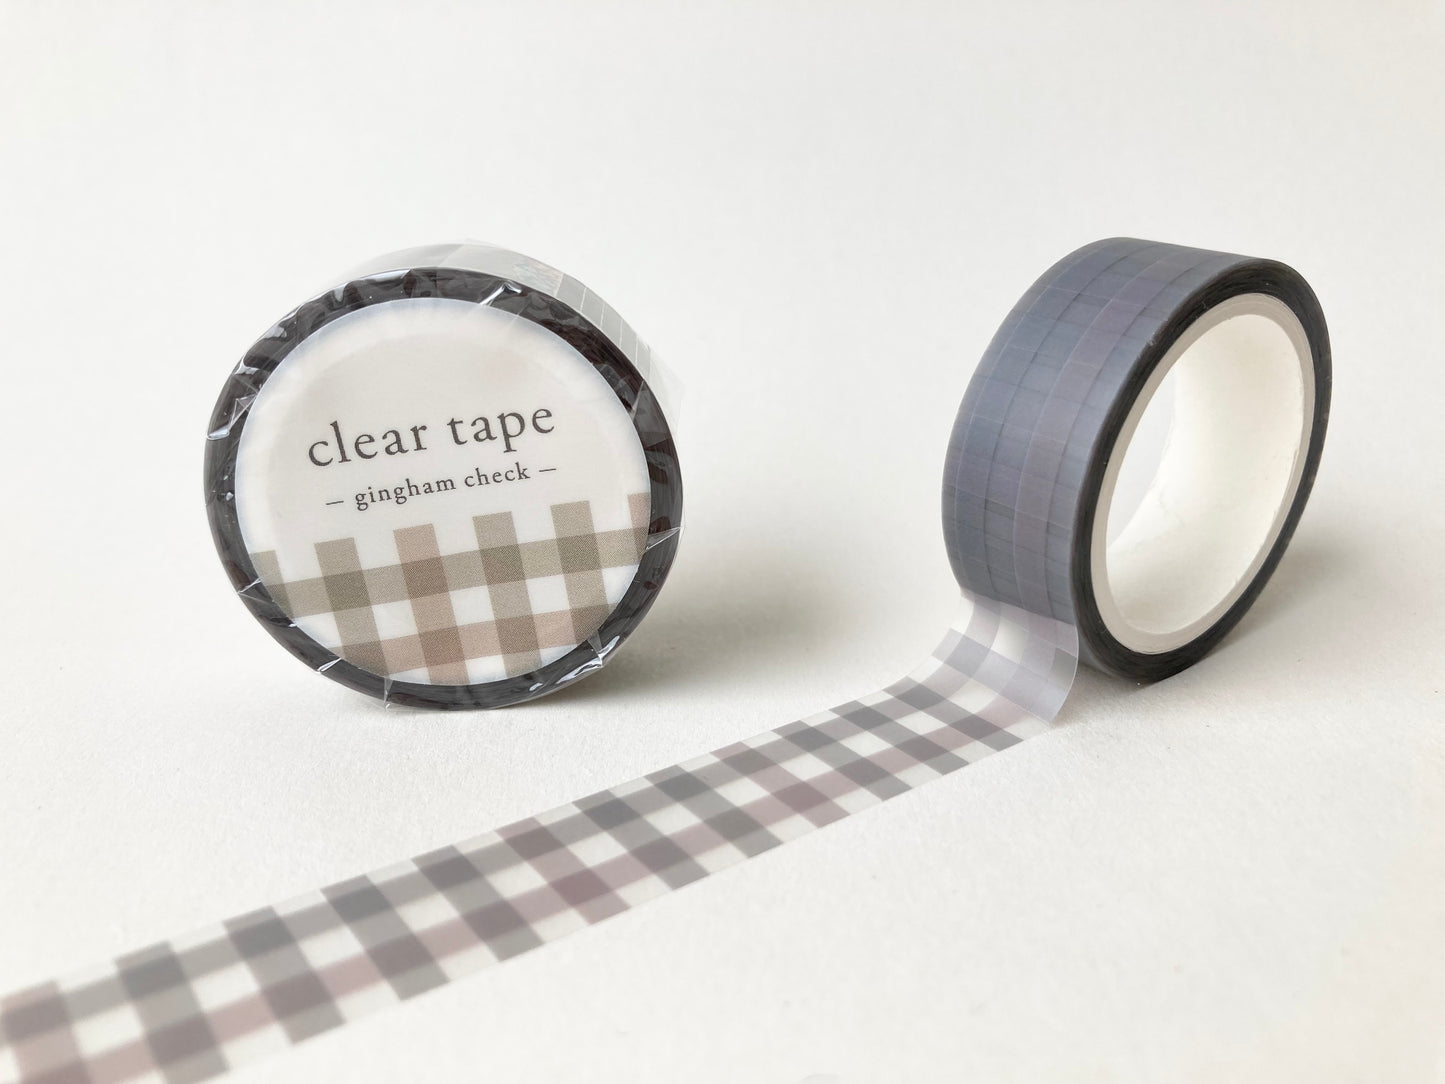 Cleartape 15mm Gingham Check